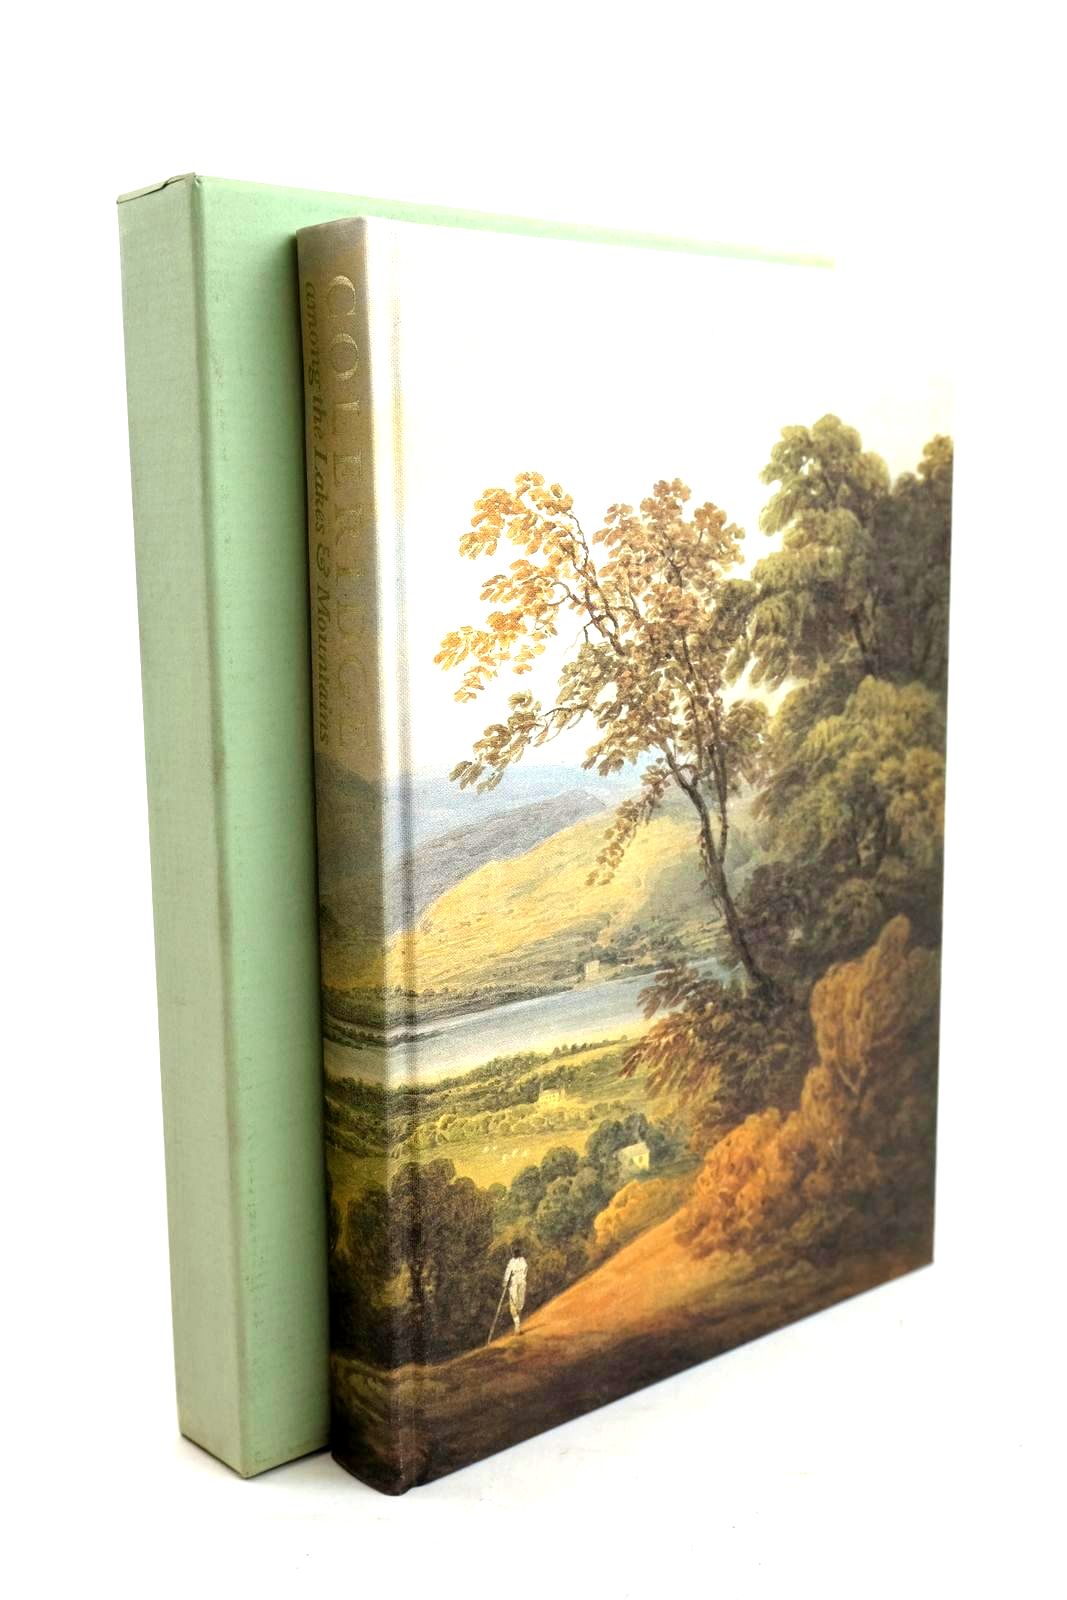 Photo of COLERIDGE AMONG THE LAKES & MOUNTAINS written by Coleridge, Samuel Taylor Hudson, Roger published by Folio Society (STOCK CODE: 1320247)  for sale by Stella & Rose's Books